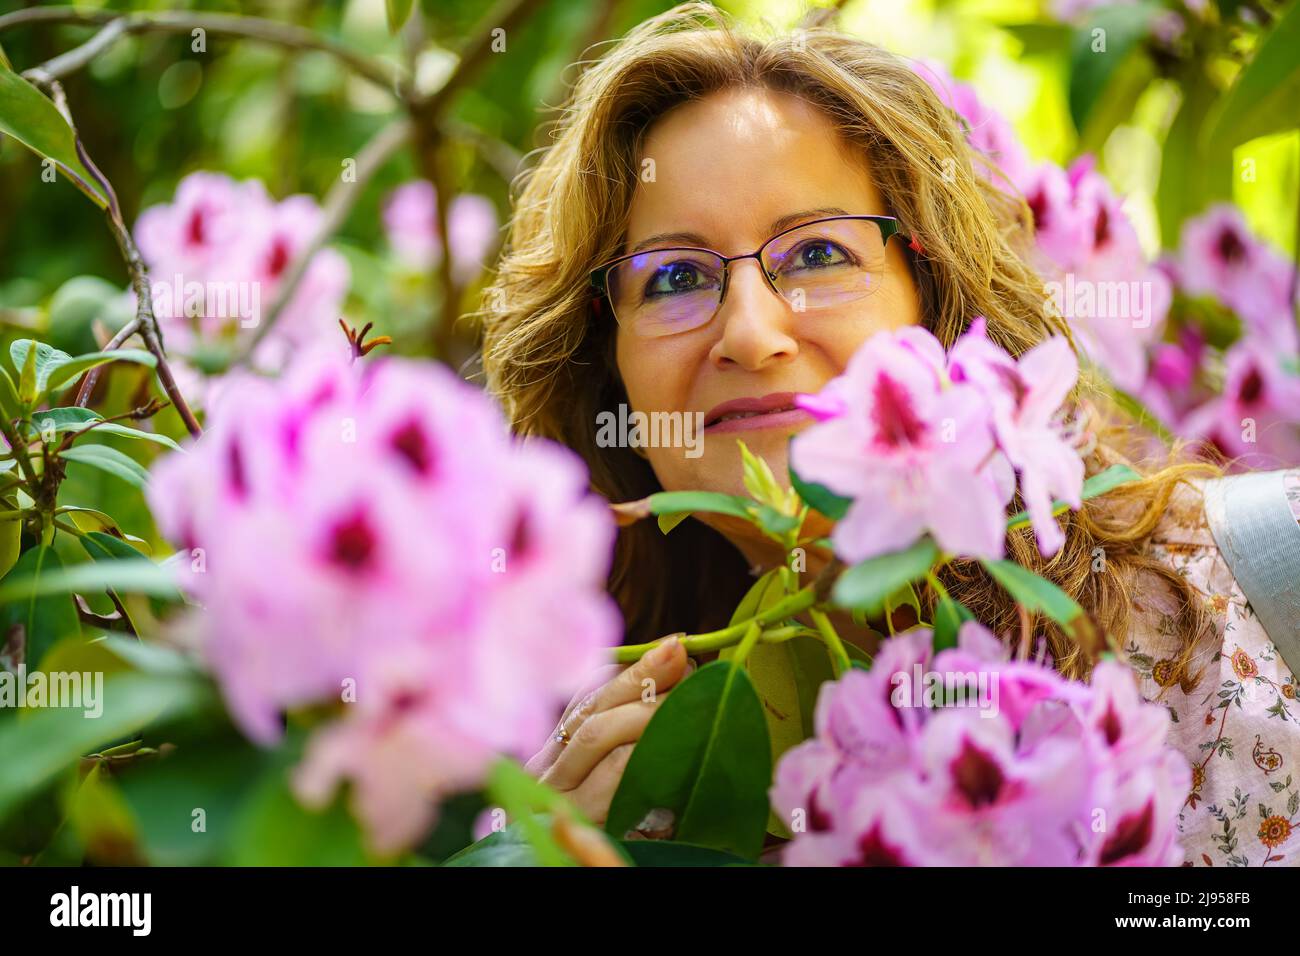 Portrait of a woman among large white flowers in the garden in spring. Stock Photo